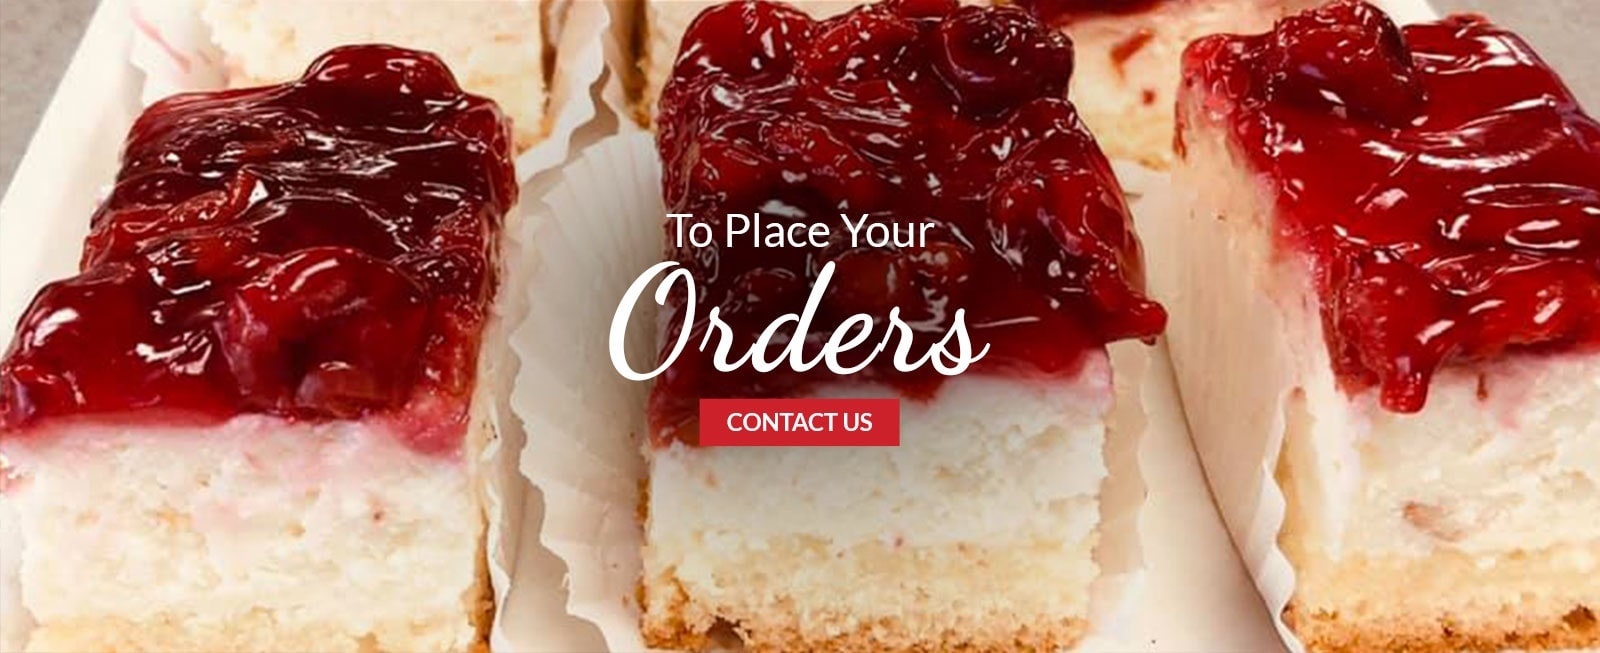 To Place Your Orders for Cakes and Pastries - Contact Us at The Brick Oven Bakery in Burlington ON